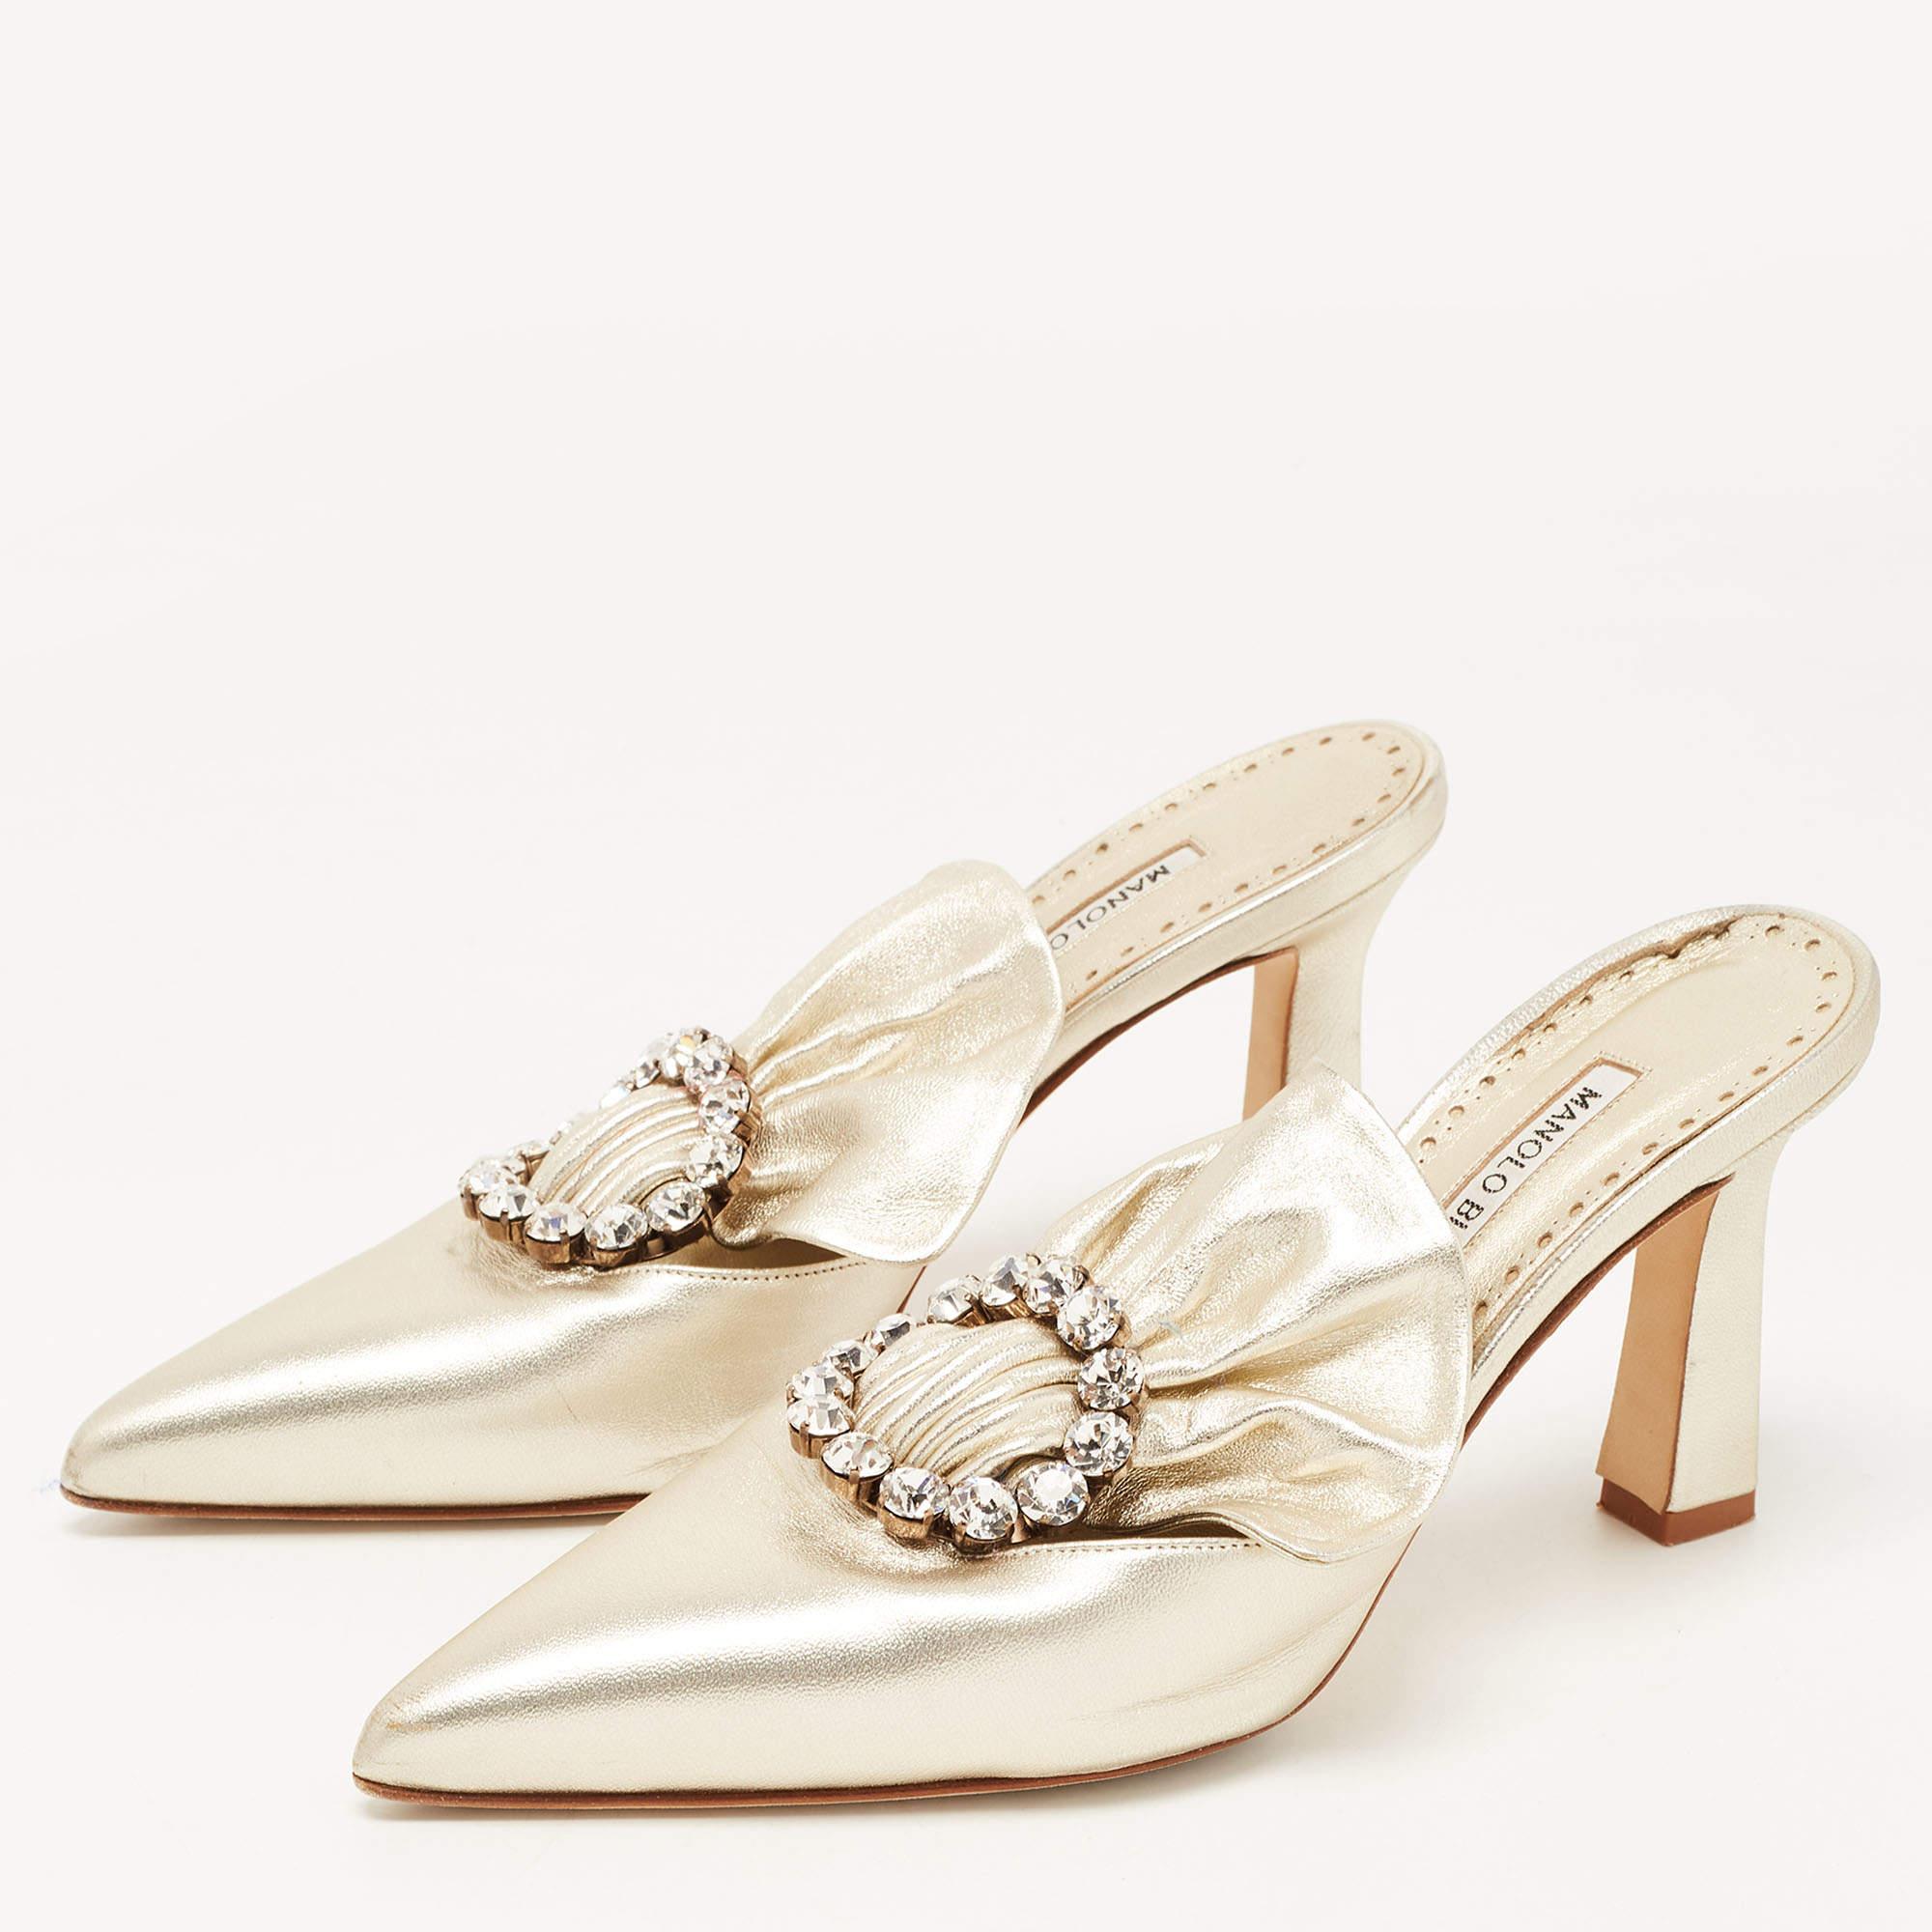 The ease of slipping into your shoes as you head out and taking them off once you're home is elevated with mules. These Manolo Blahnik mules for women bring the same comfort, with a lot of style.

